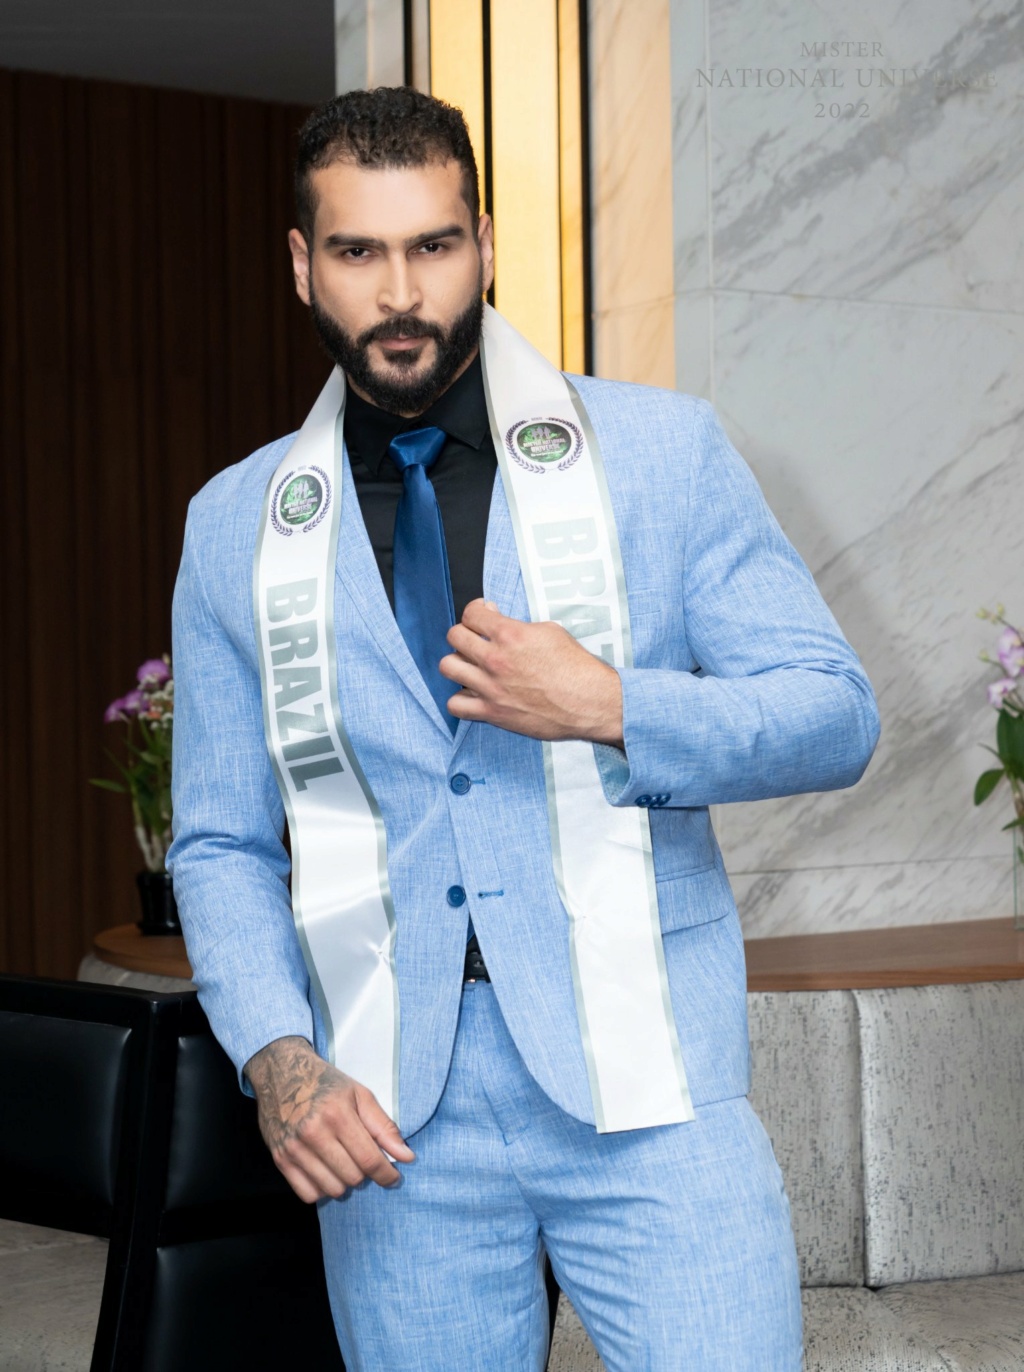 Mister National Universe 2022 is Việt Hoàng from Vietnam 28484410